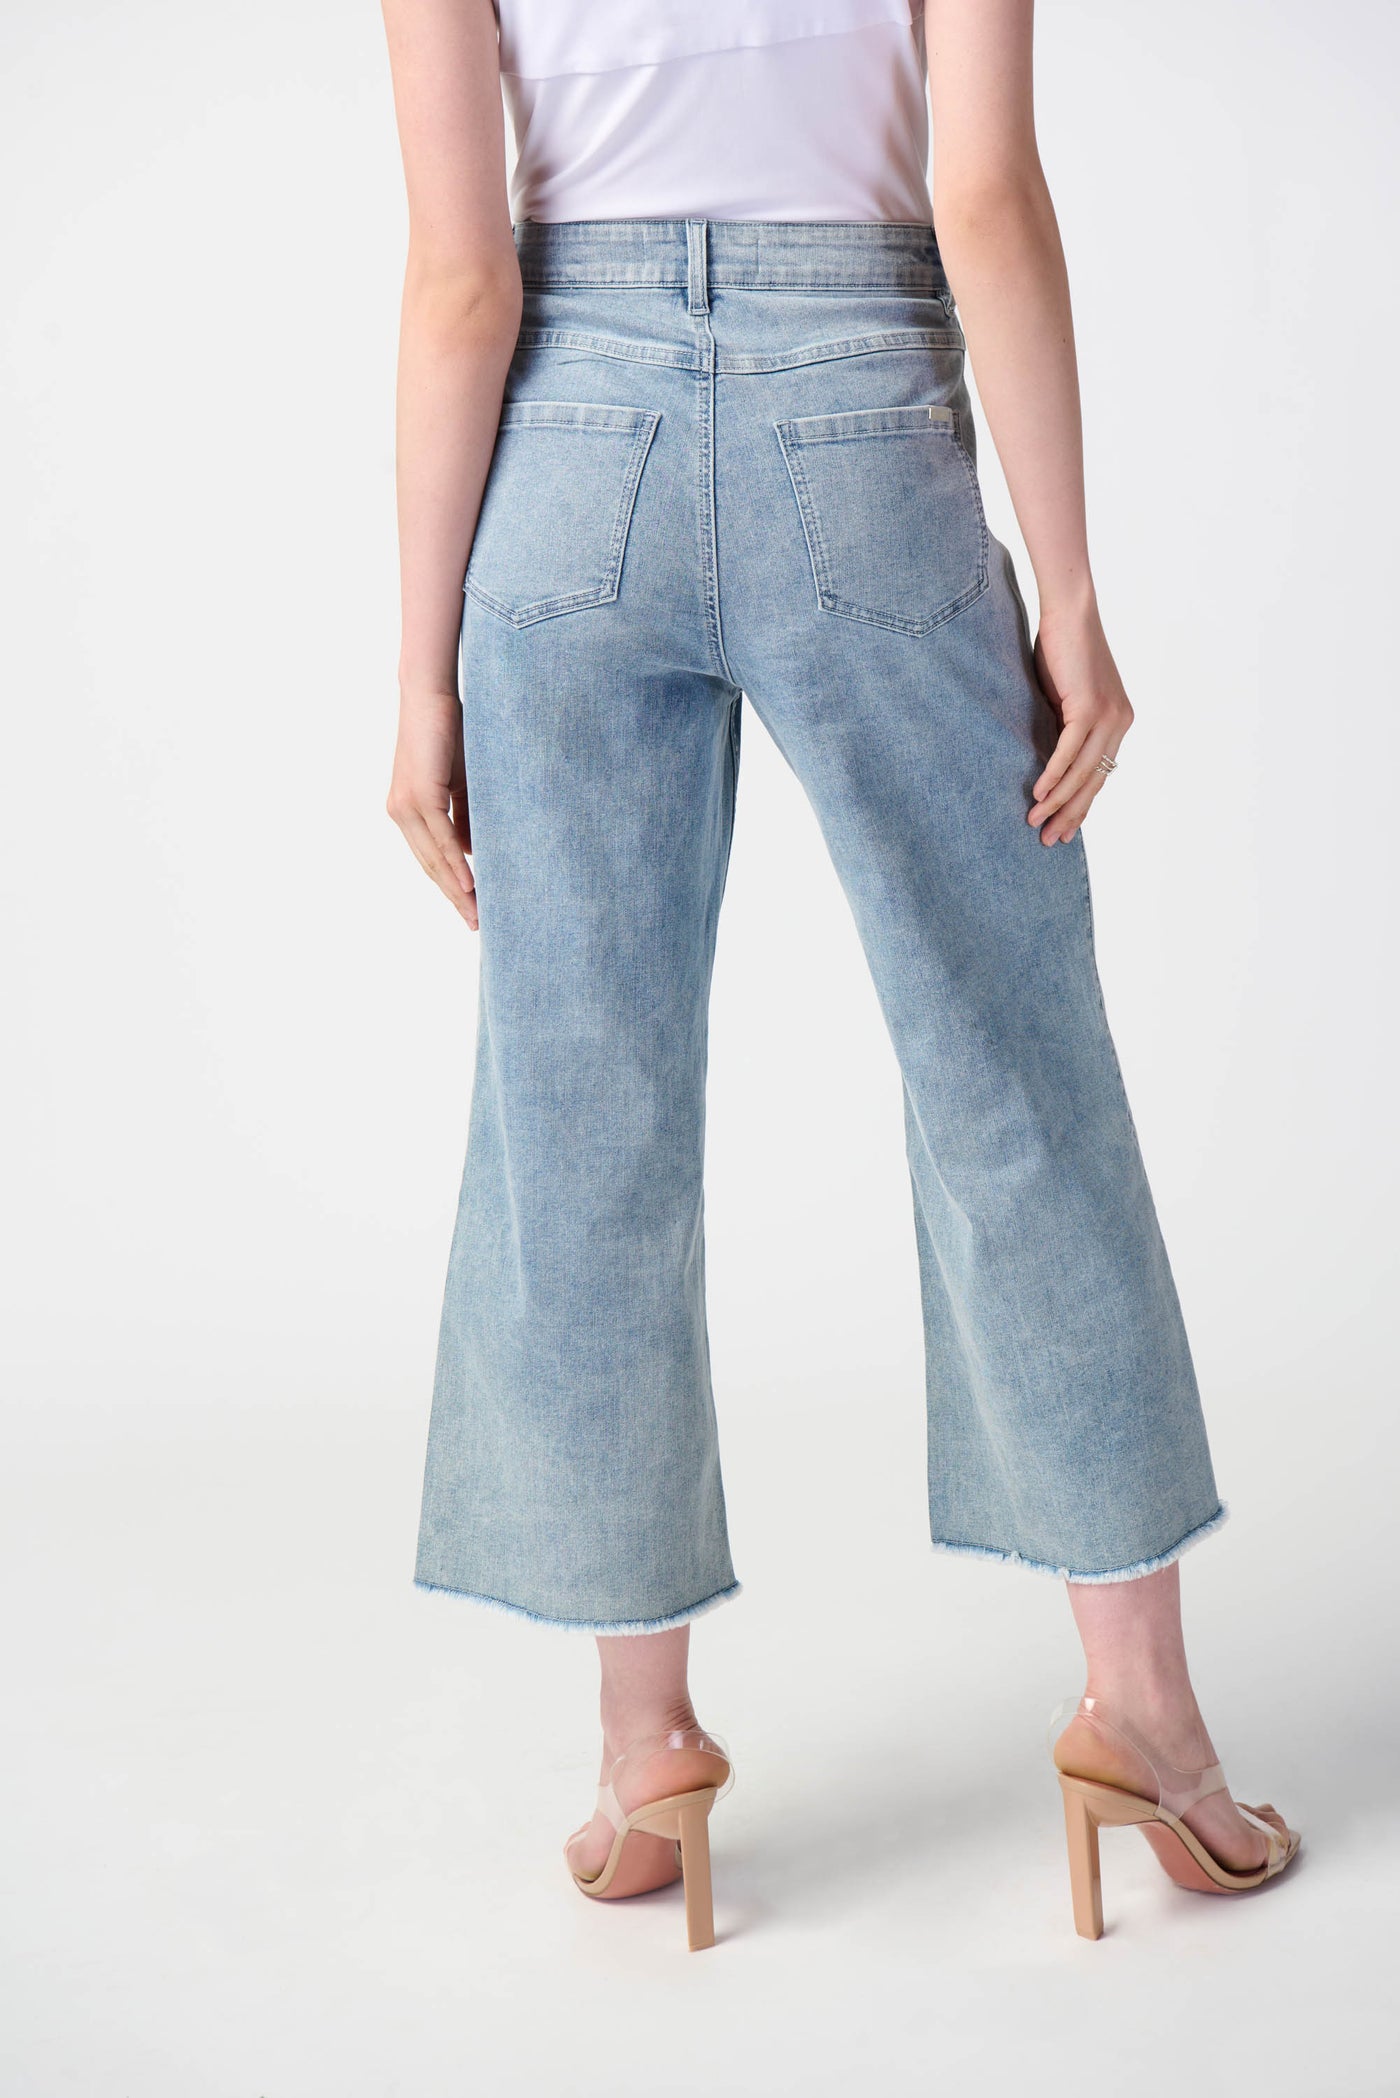 Joseph Ribkoff Culotte Jeans With Embellished Front Seam 